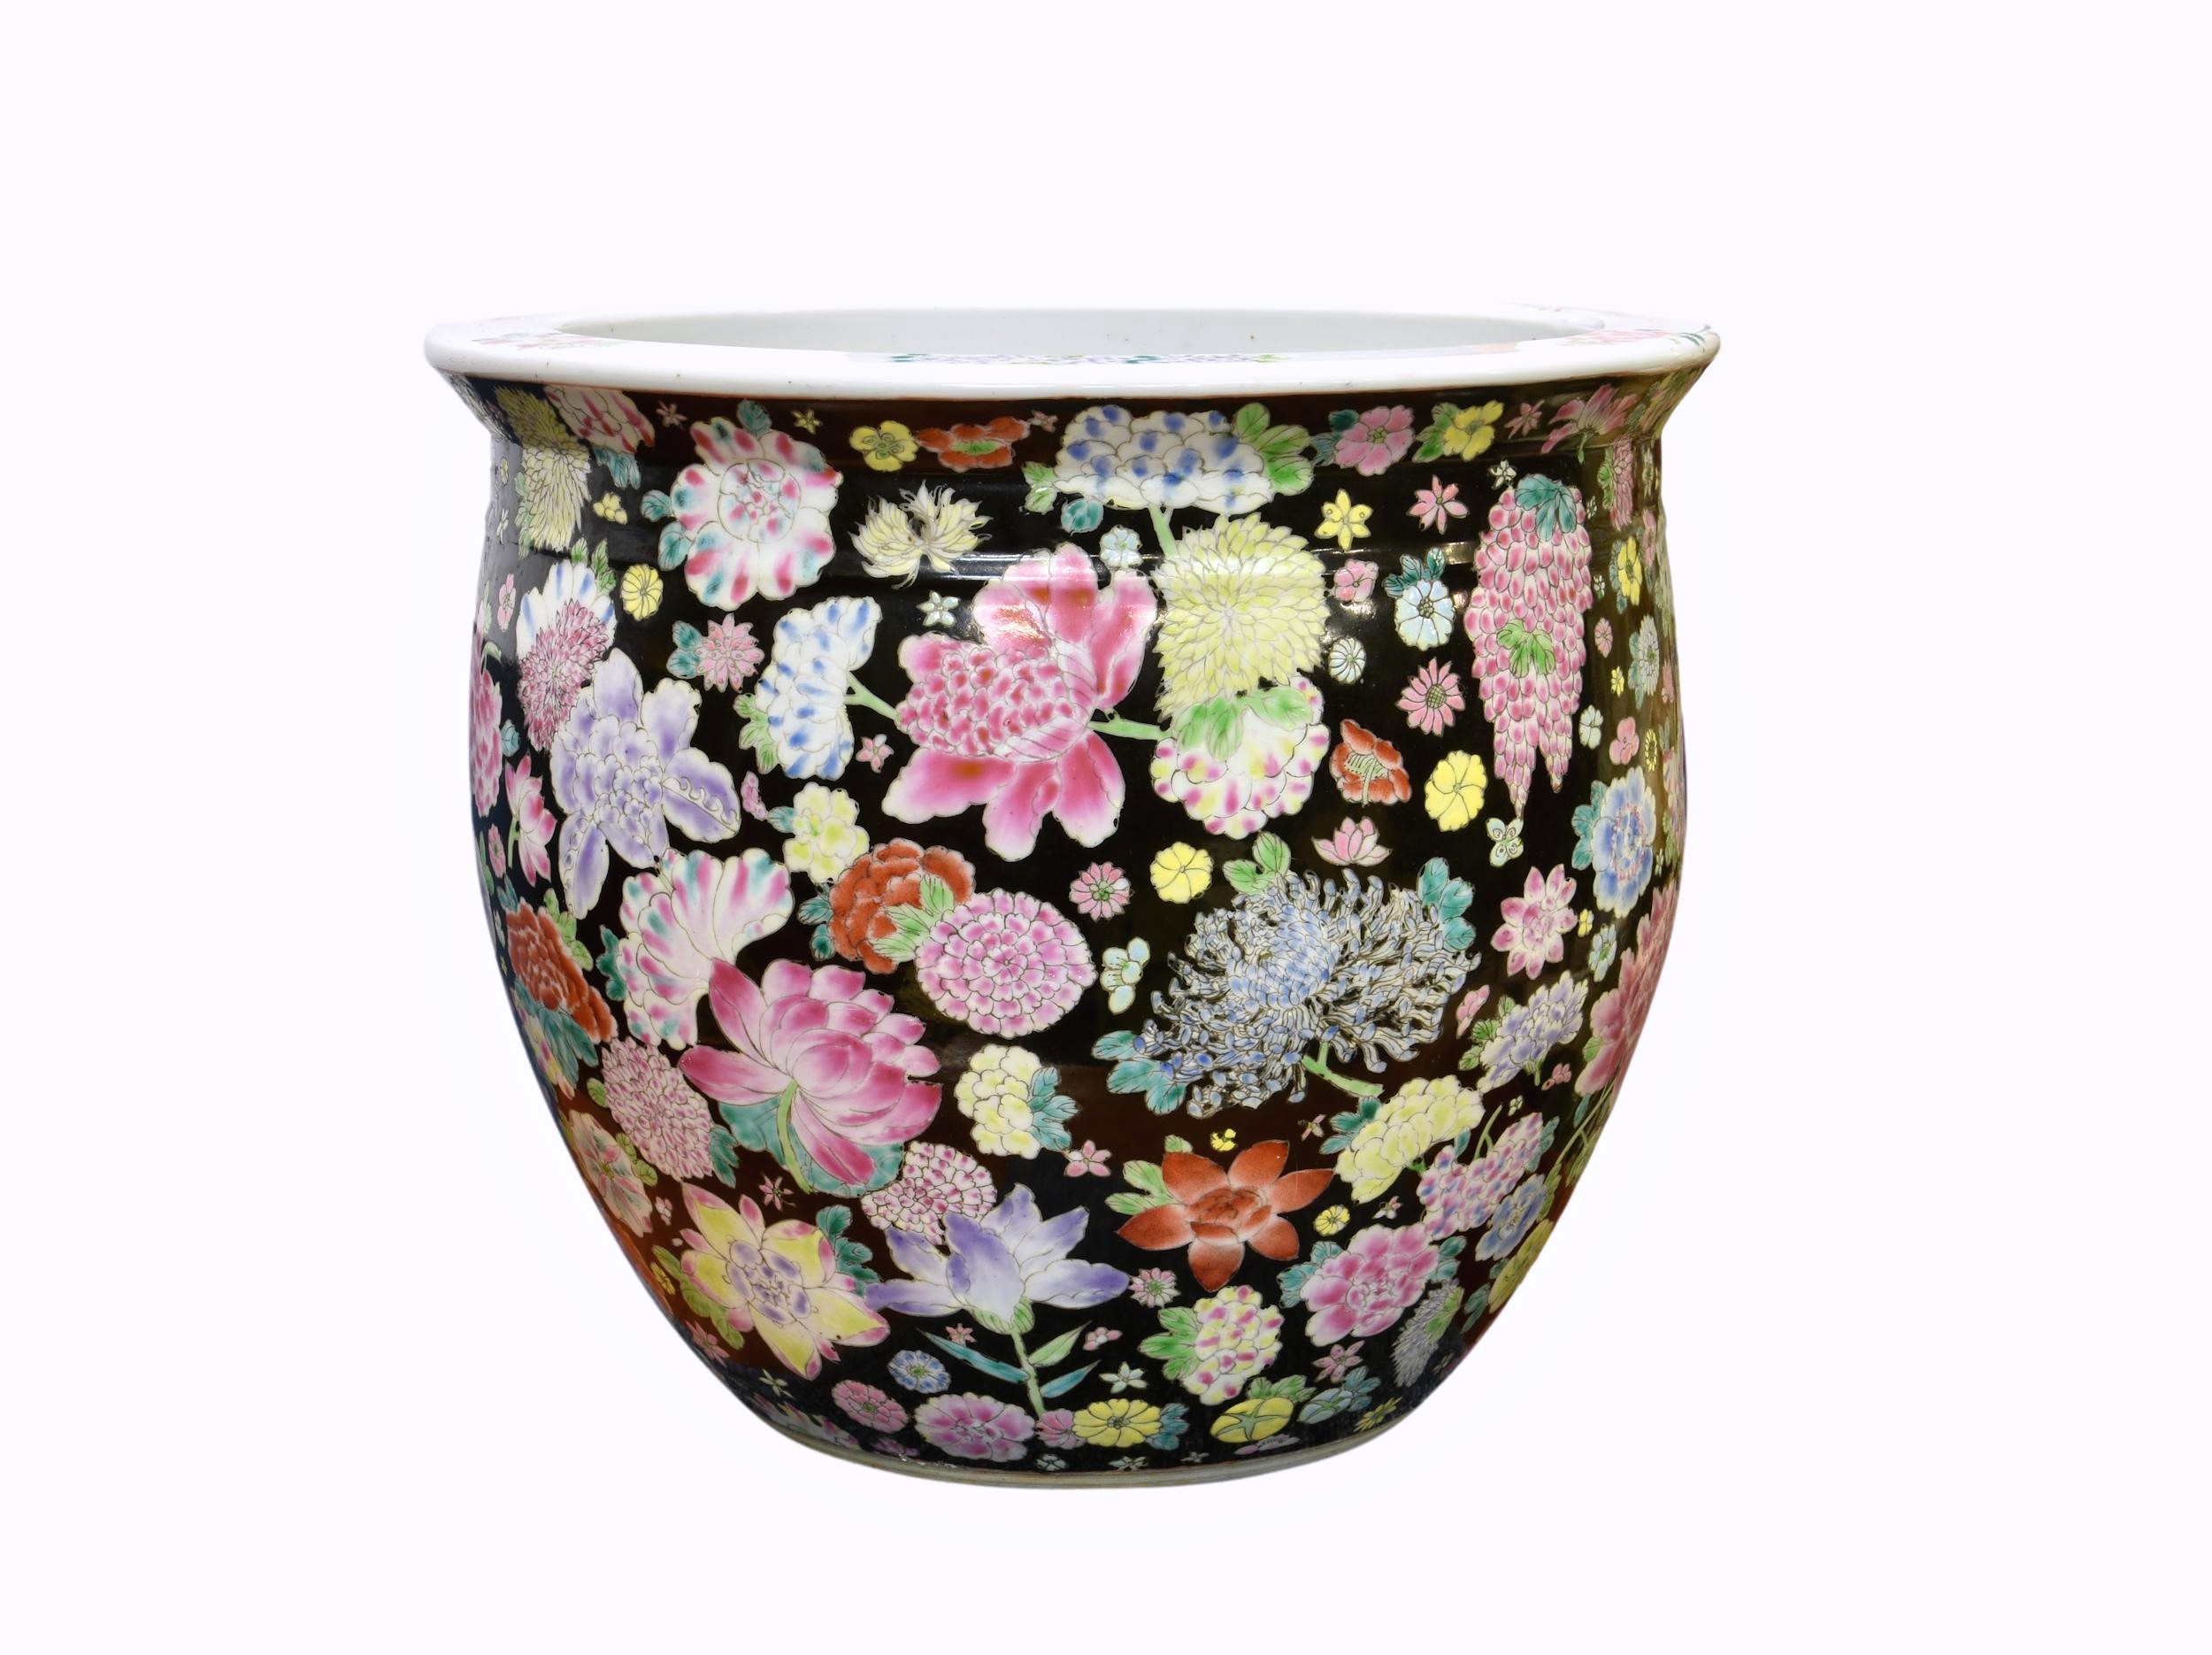 A Chinese porcelain famille rose fish bowl or jardiniere, mid-20th century, enamelled with mille